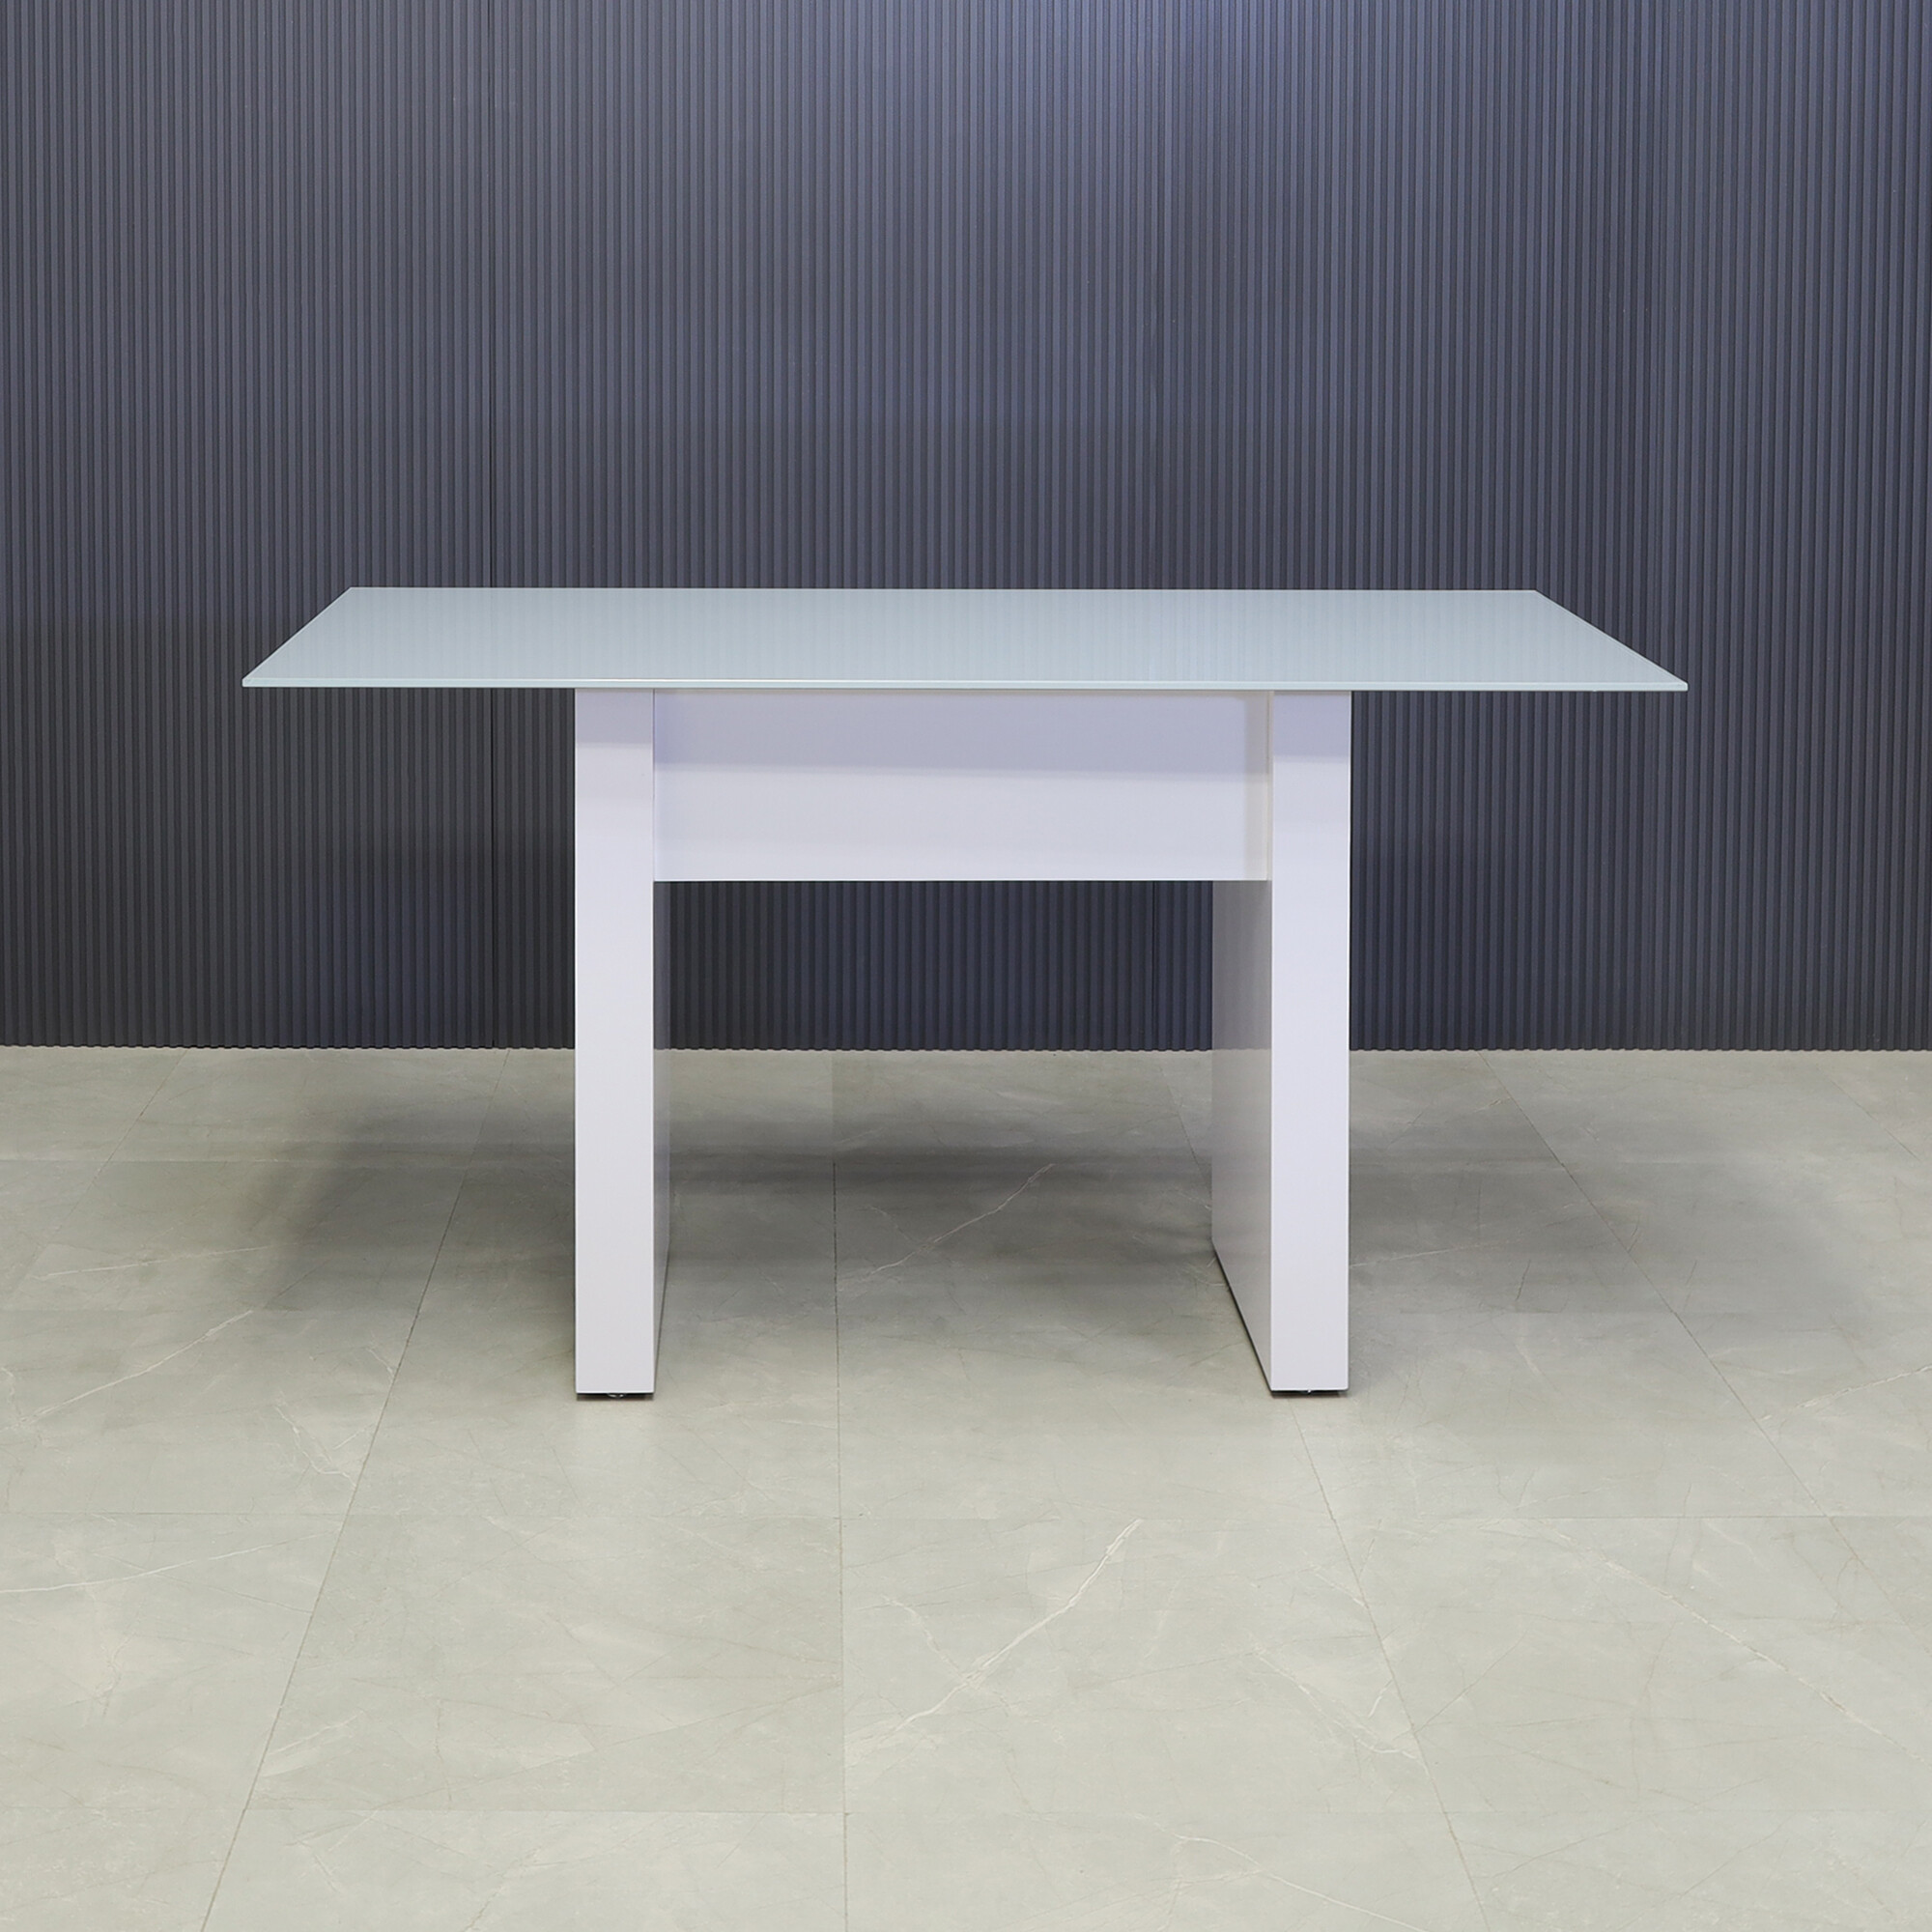 72-inch width x 42-height, Ashville Tempered Glass Collaboration Table in 1/2